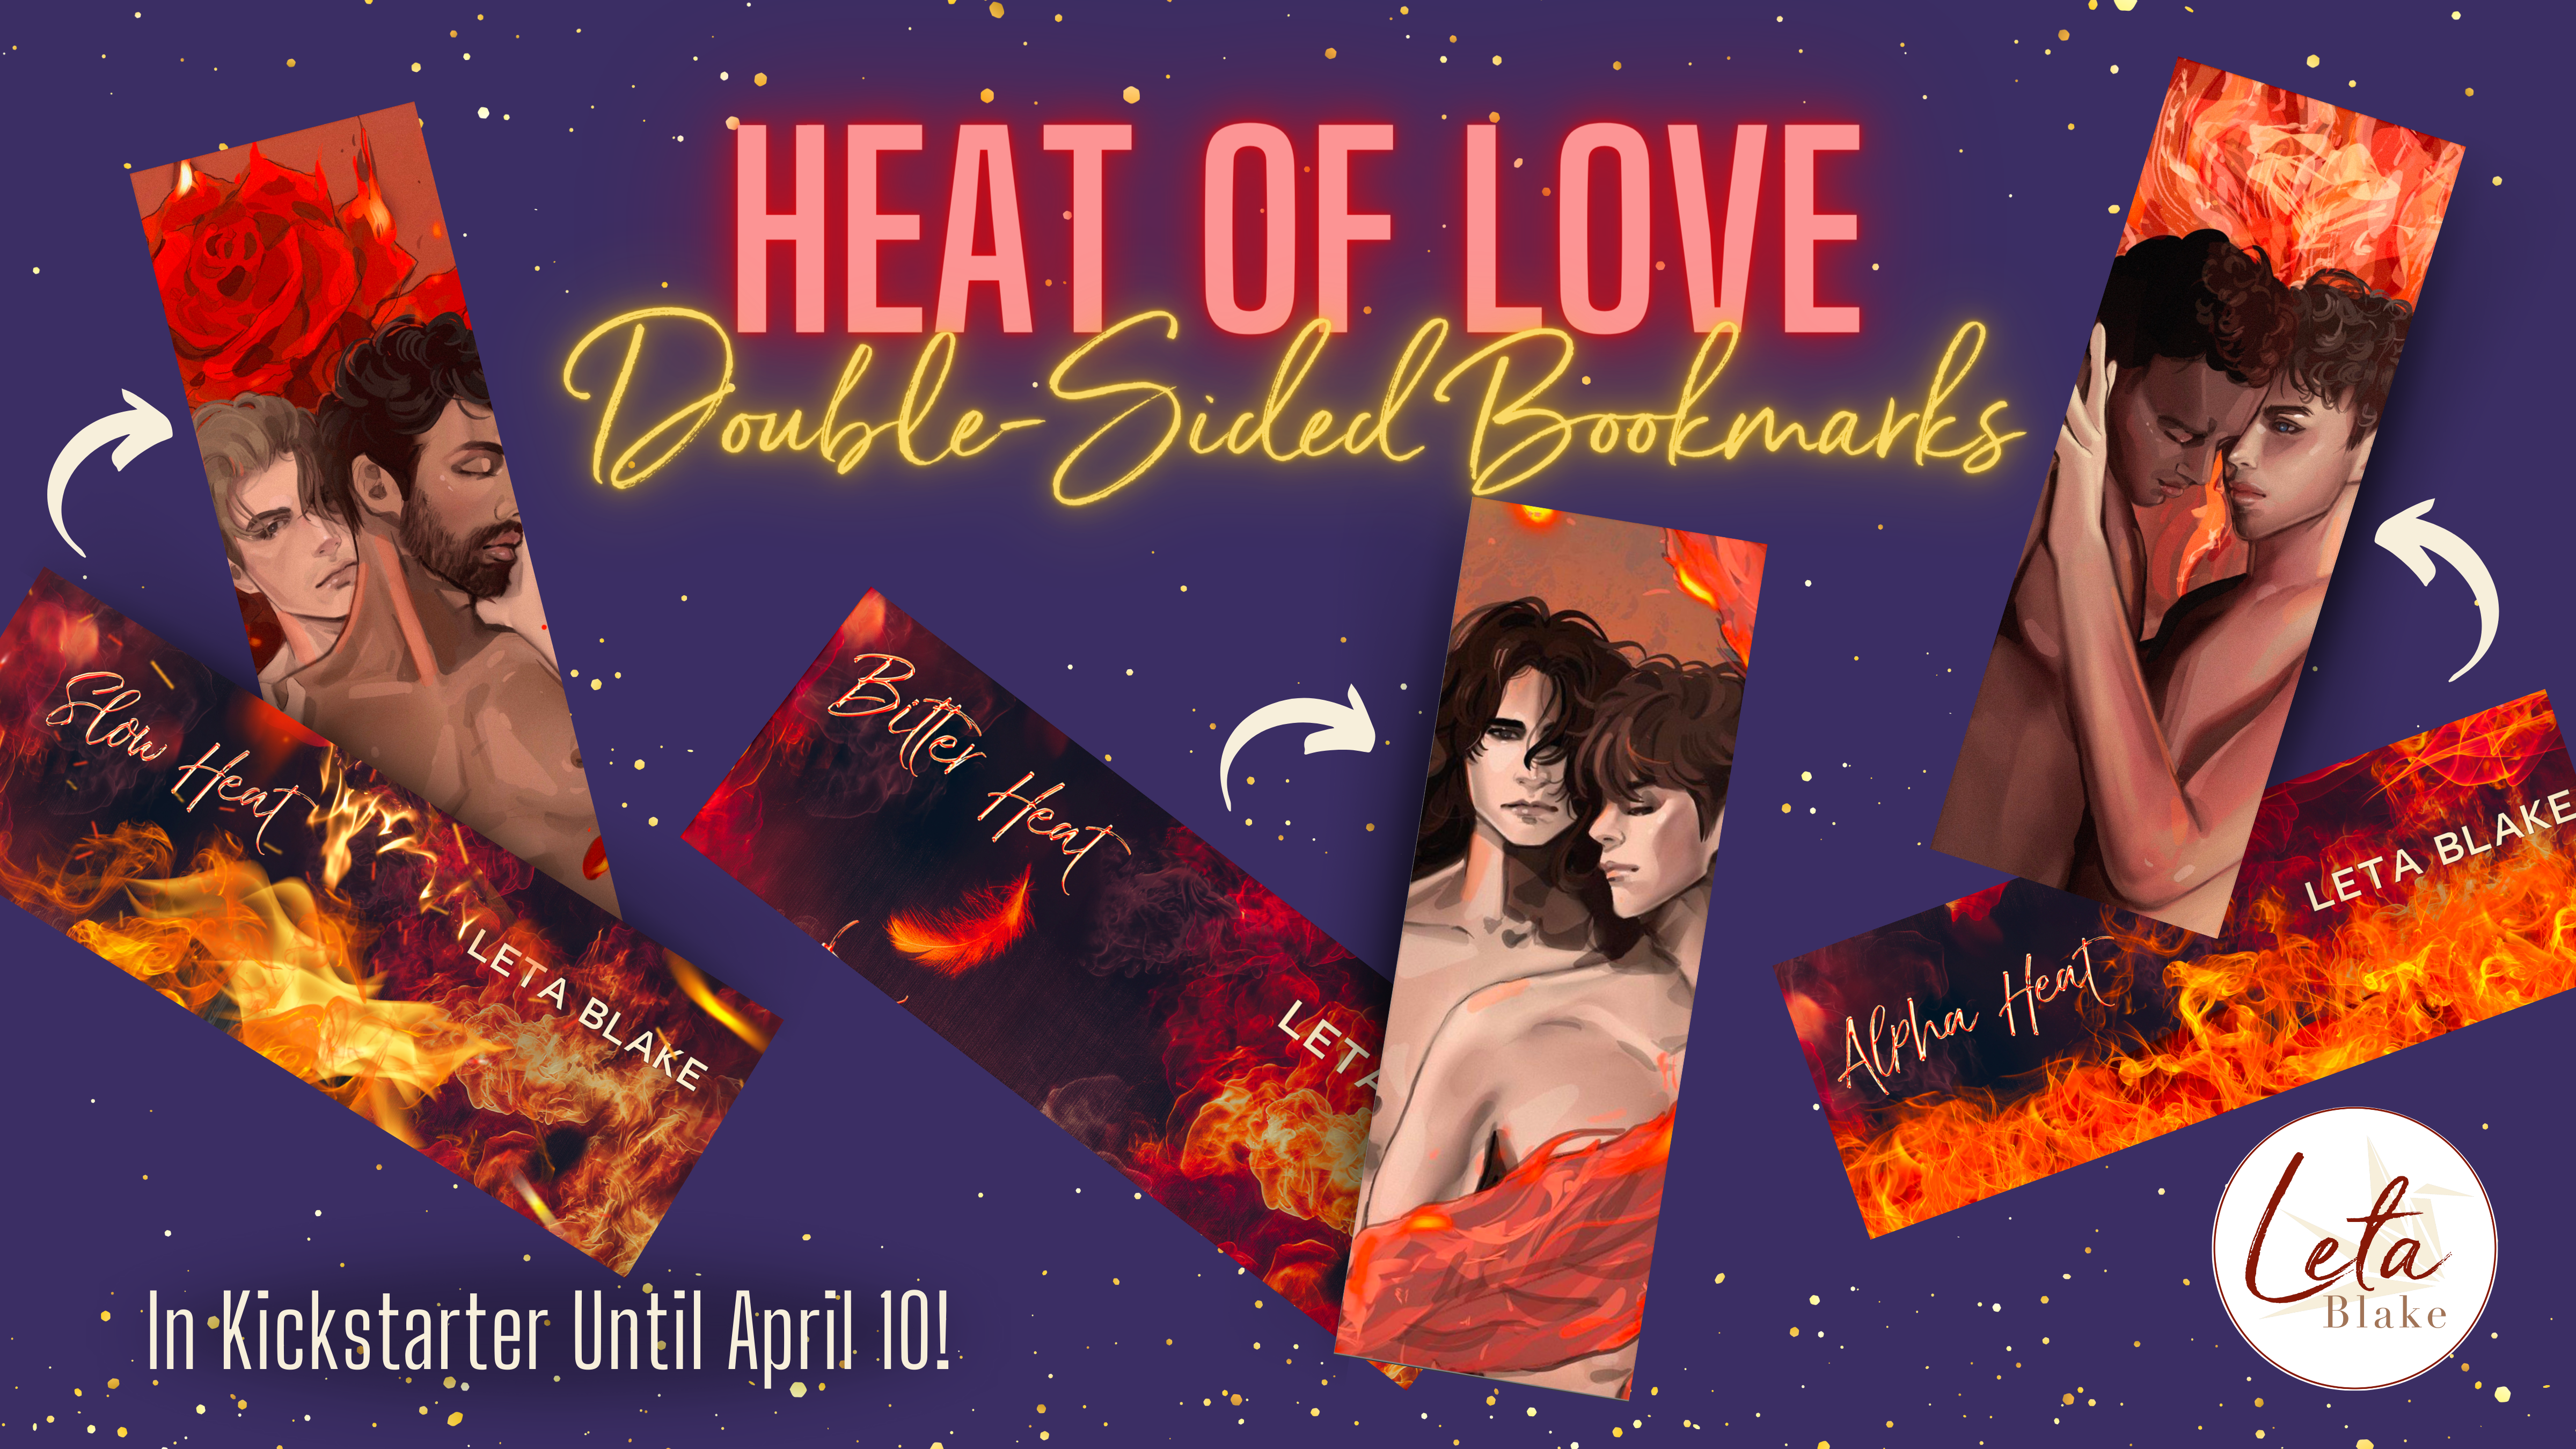 Three sets of bookmarks on a dark blue background. Each bookmark has LCheery art on one side and Miblart fiery object design on the other. Text says “Heat of Love”, “Double-sided Bookmarks”, and “In Kickstarter until April 10”